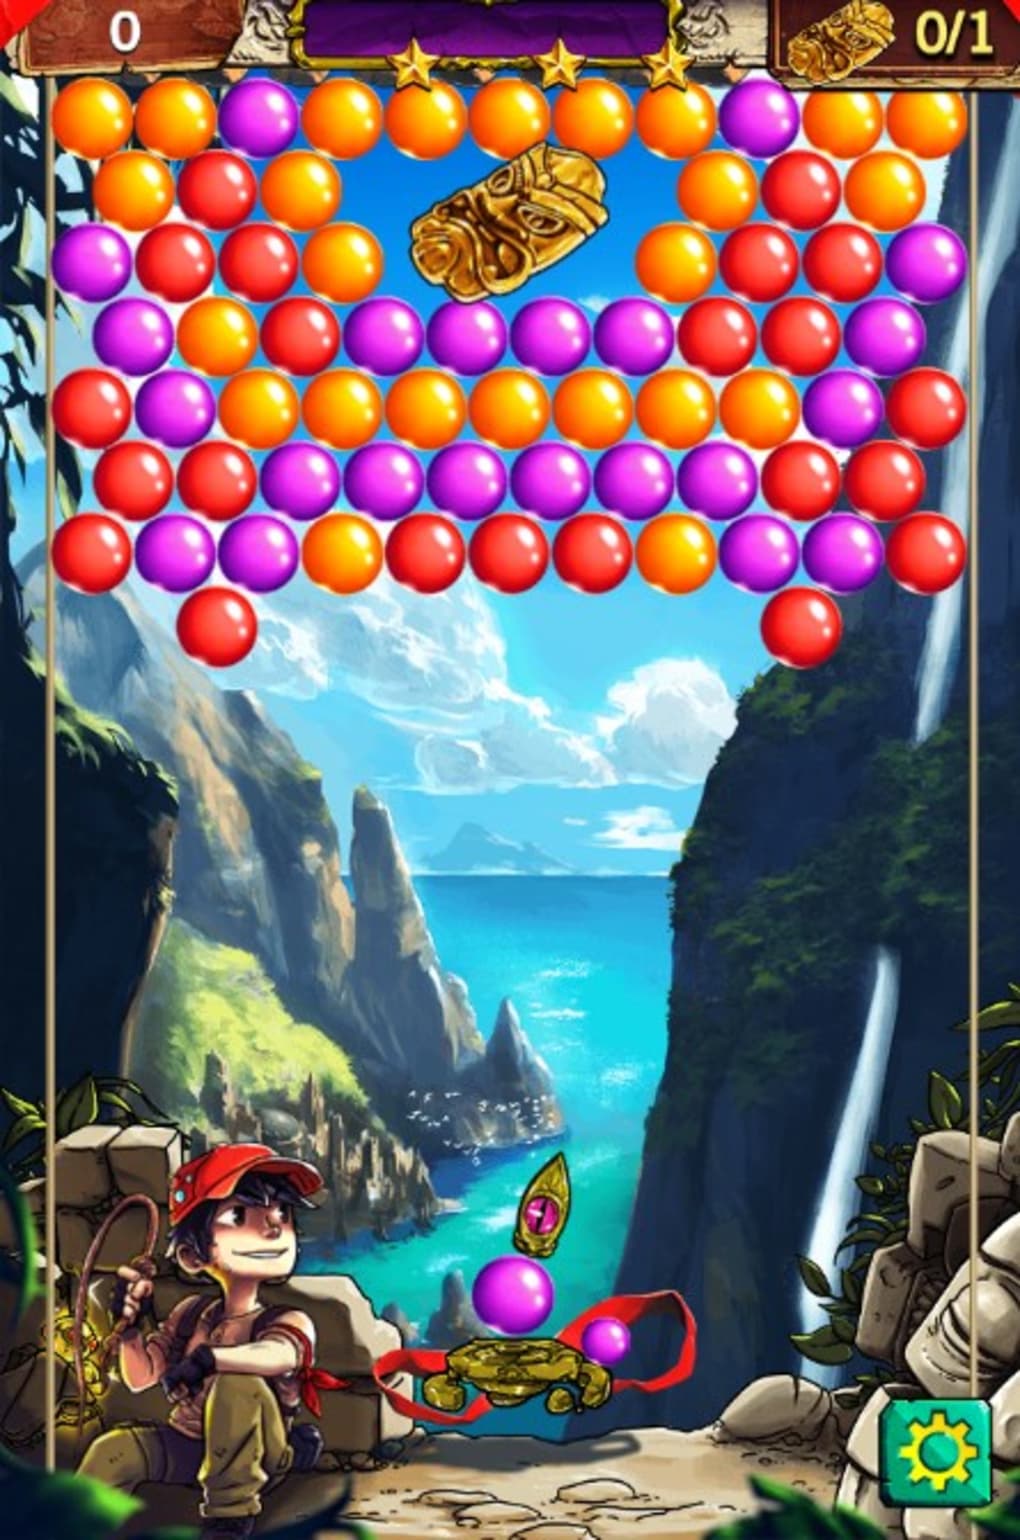 Bubble Pop: Bubble Shooter, Fun Free Bubble Popping Games For